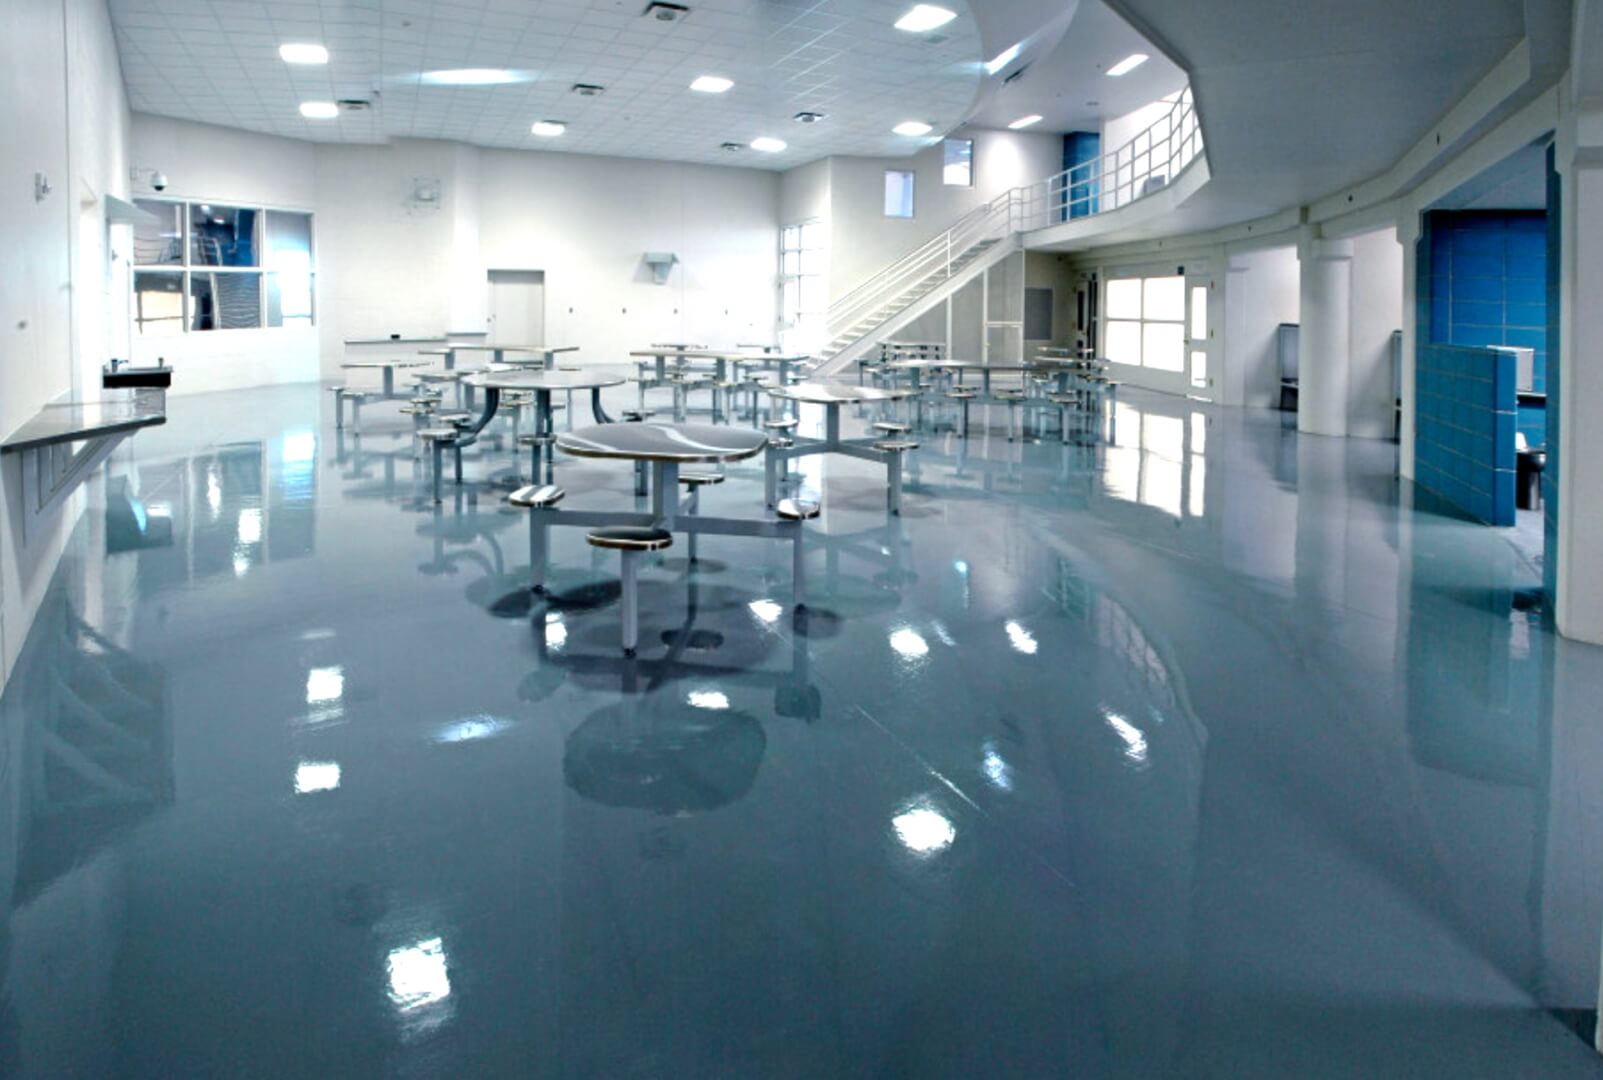 Epoxy Flooring in Commercial Spaces: Benefits and Applications